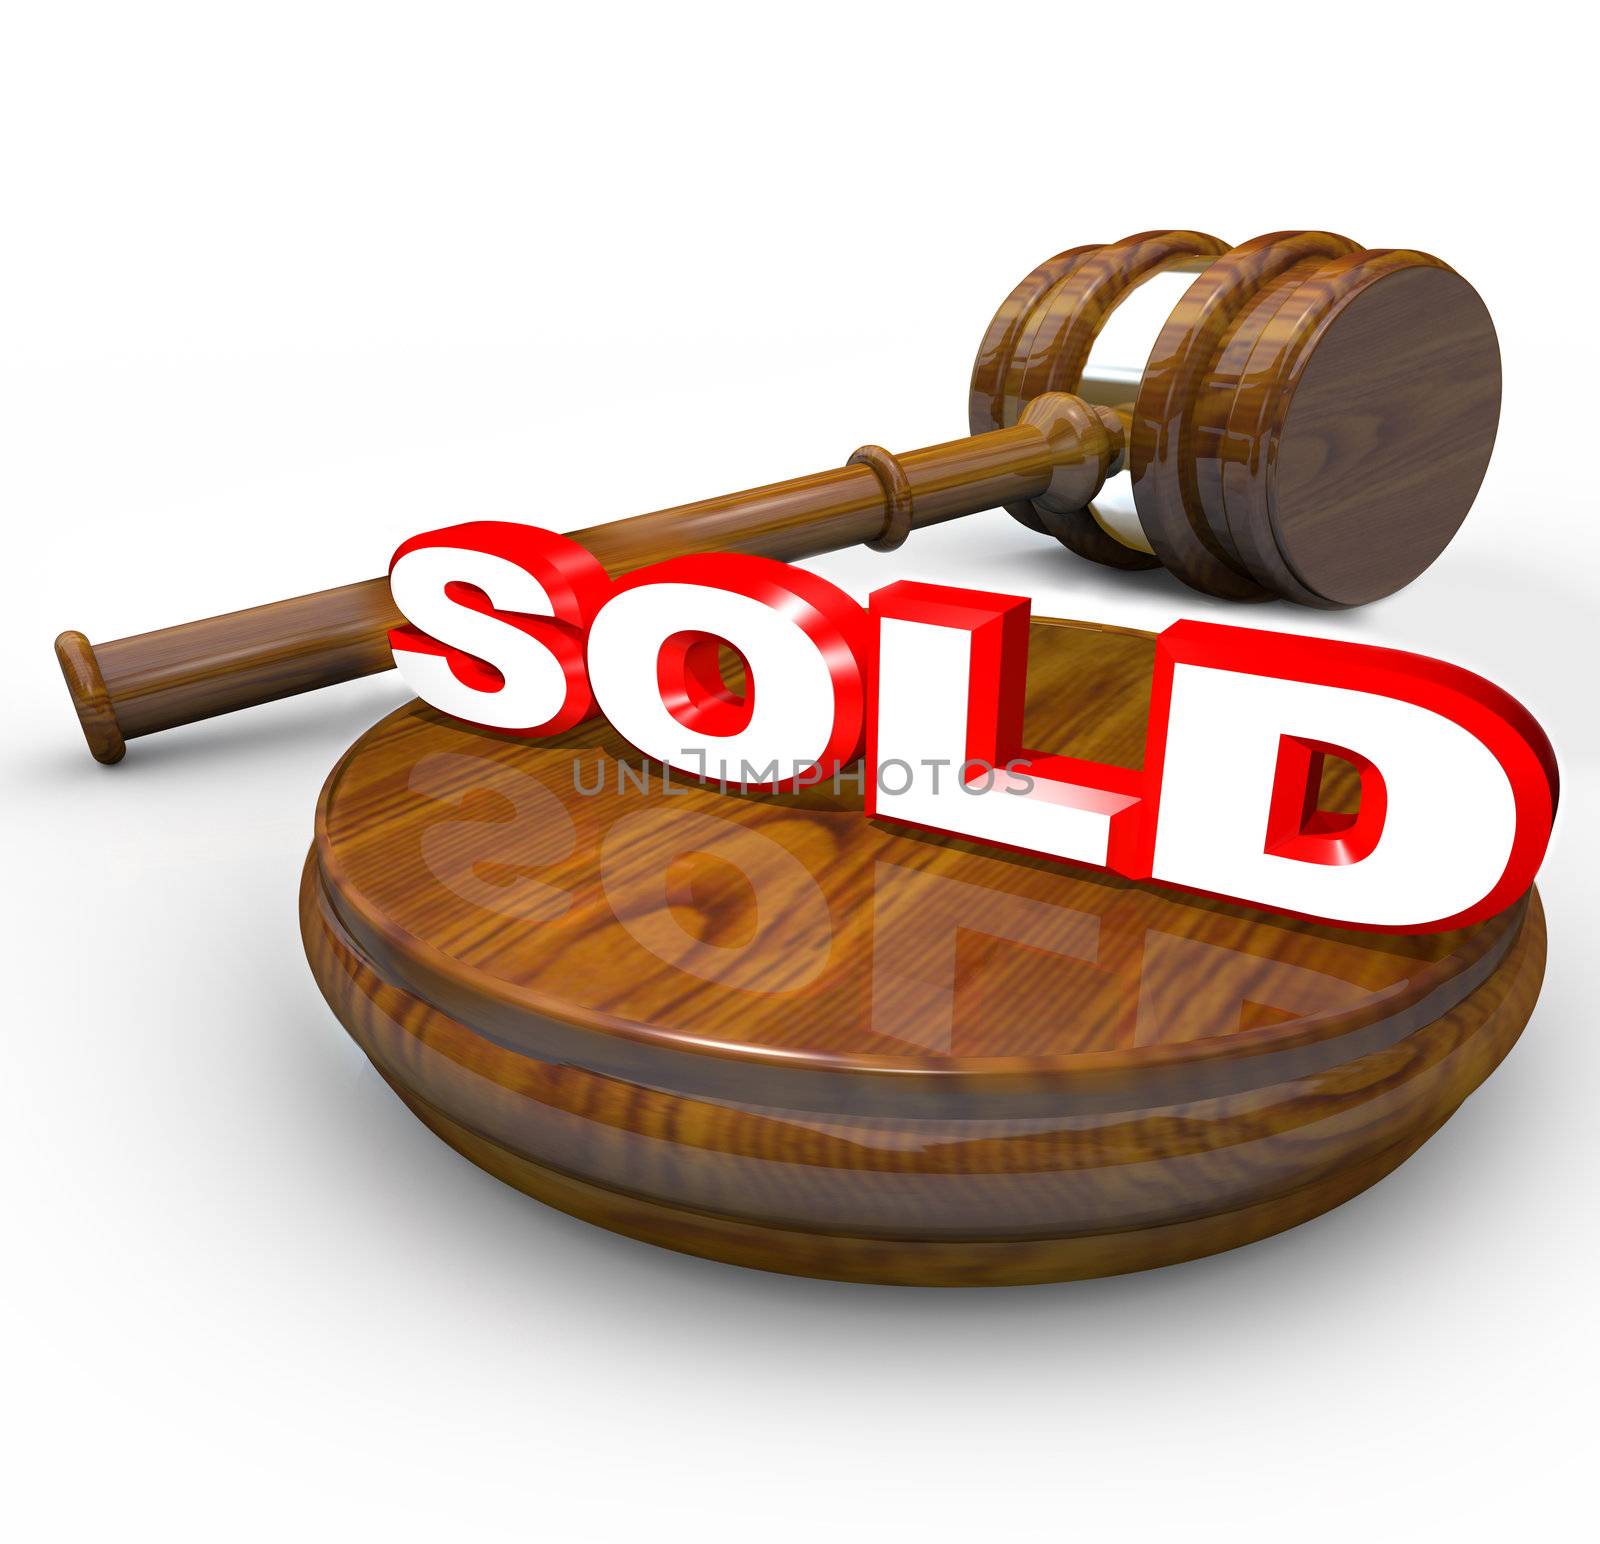 Sold - Gavel Proclaims Final Word on Auction Buy and Selling by iQoncept